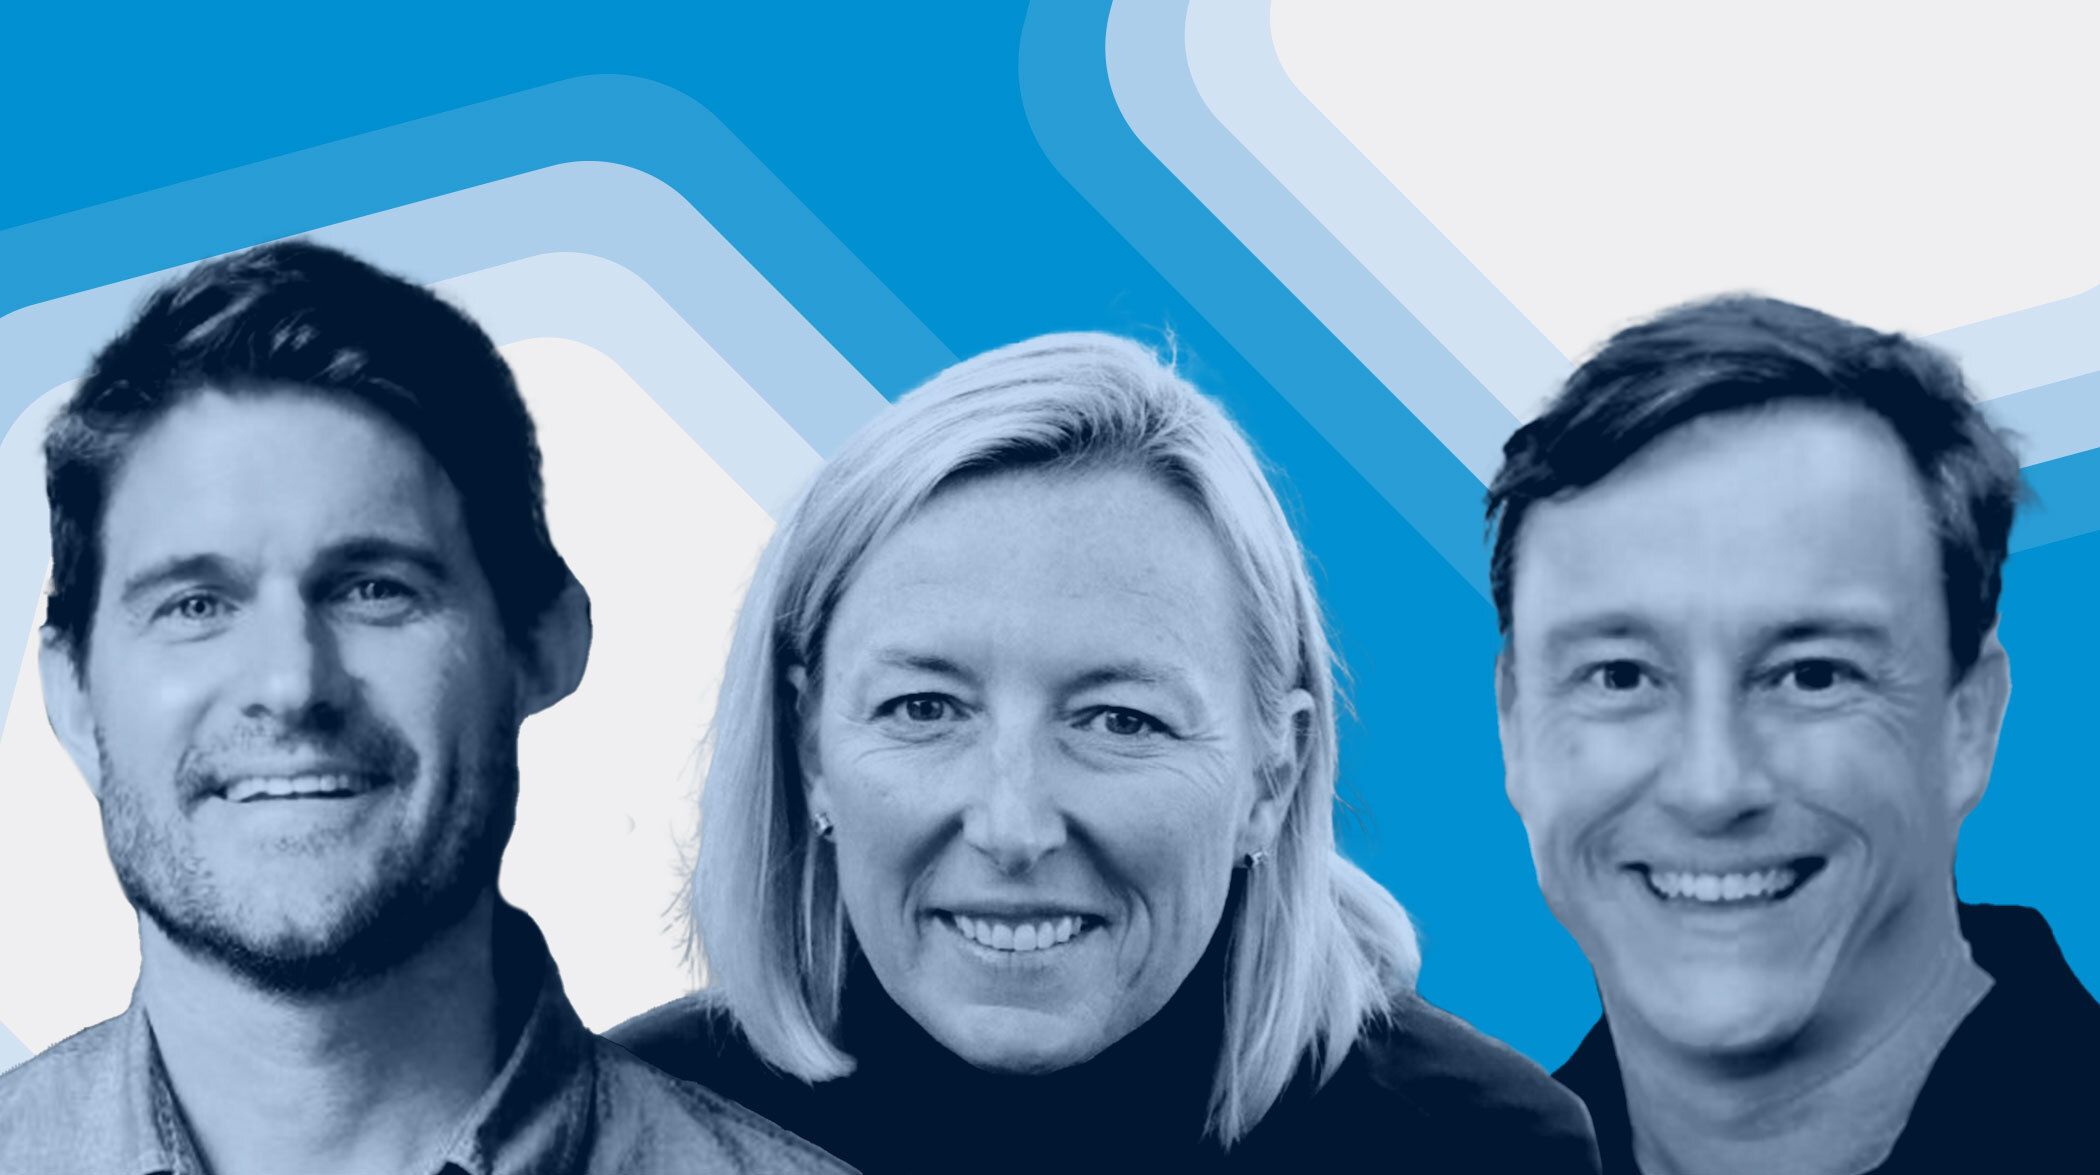 Cart.com Expands Senior Leadership Team, Welcomes Five Industry Veterans to Drive Continued Growth